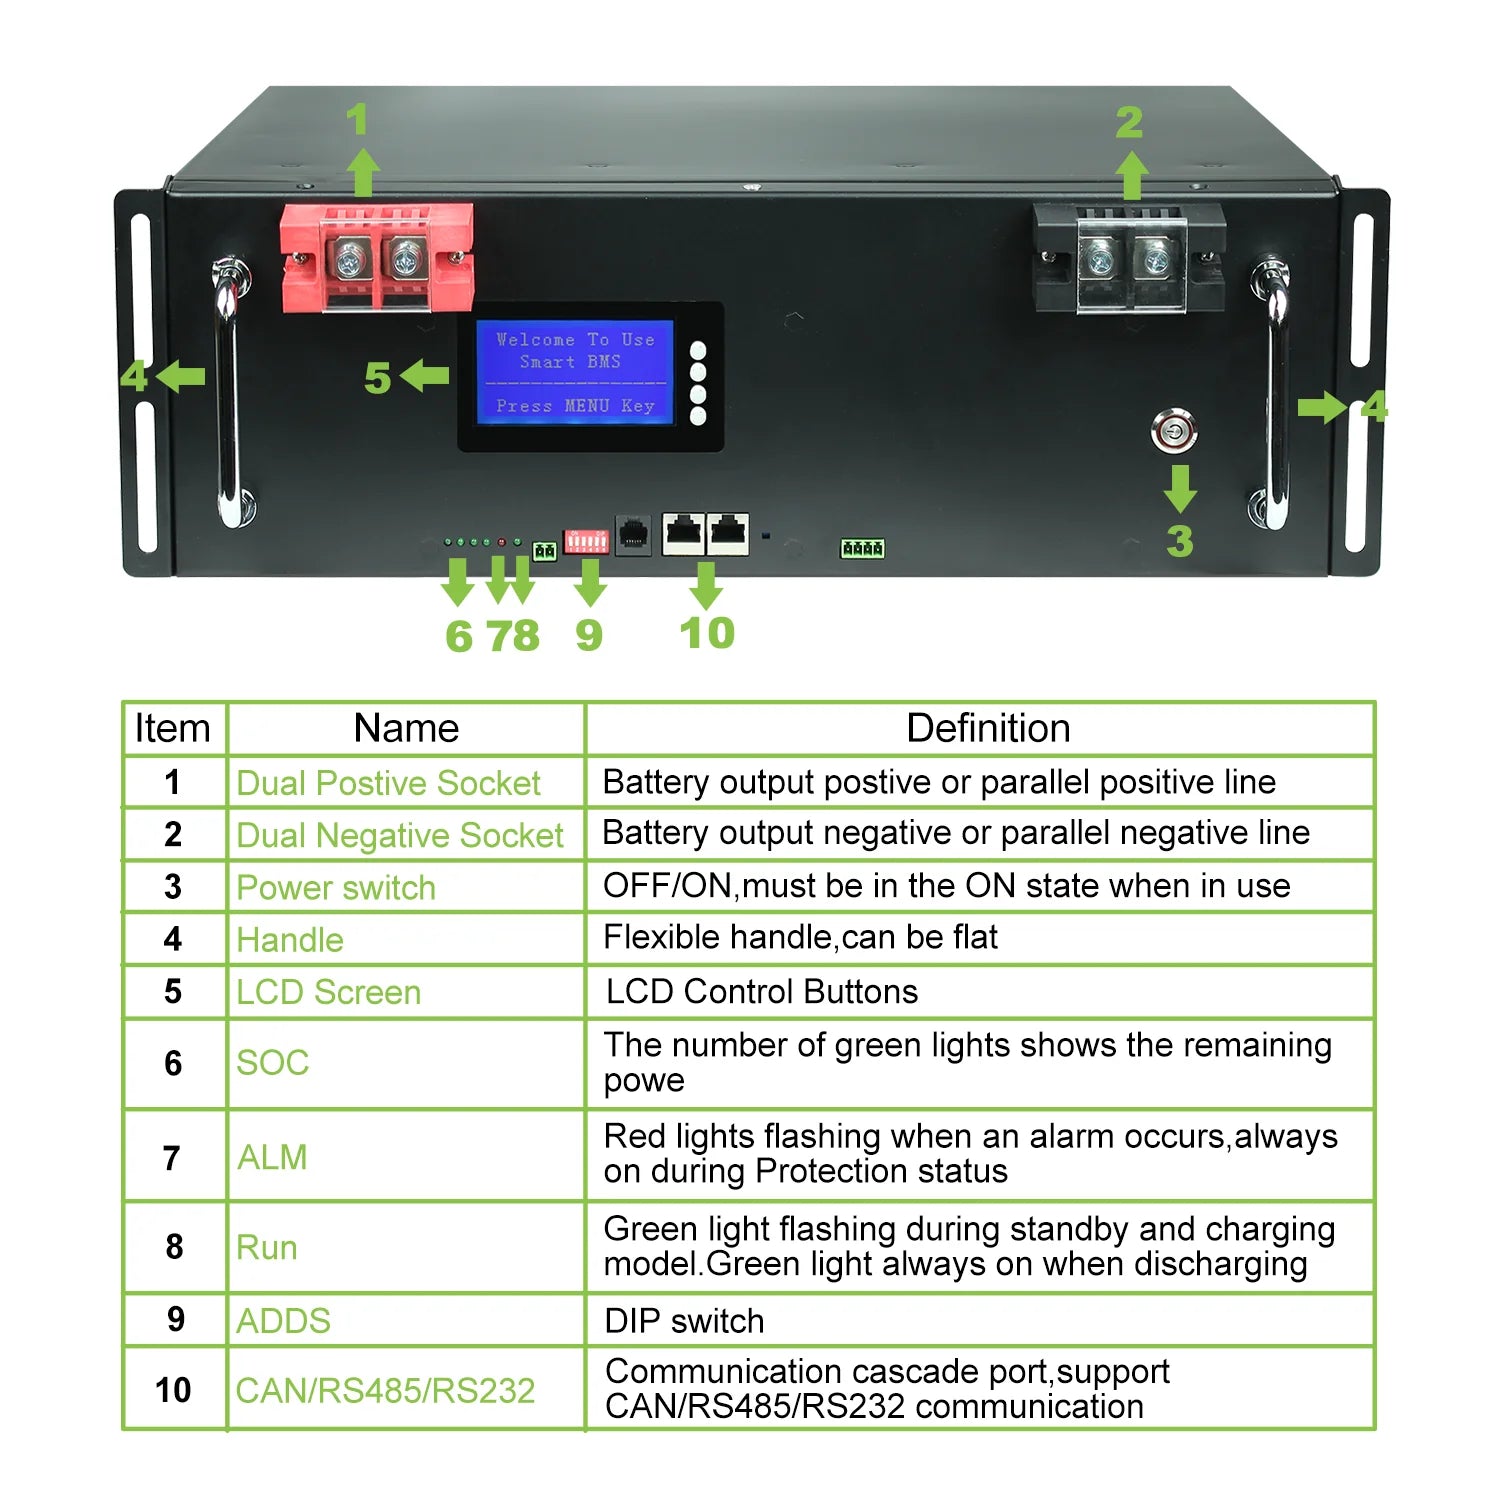 Smart BKS 5: A portable battery pack with LCD screen and indicator lights for parallel charging and monitoring.